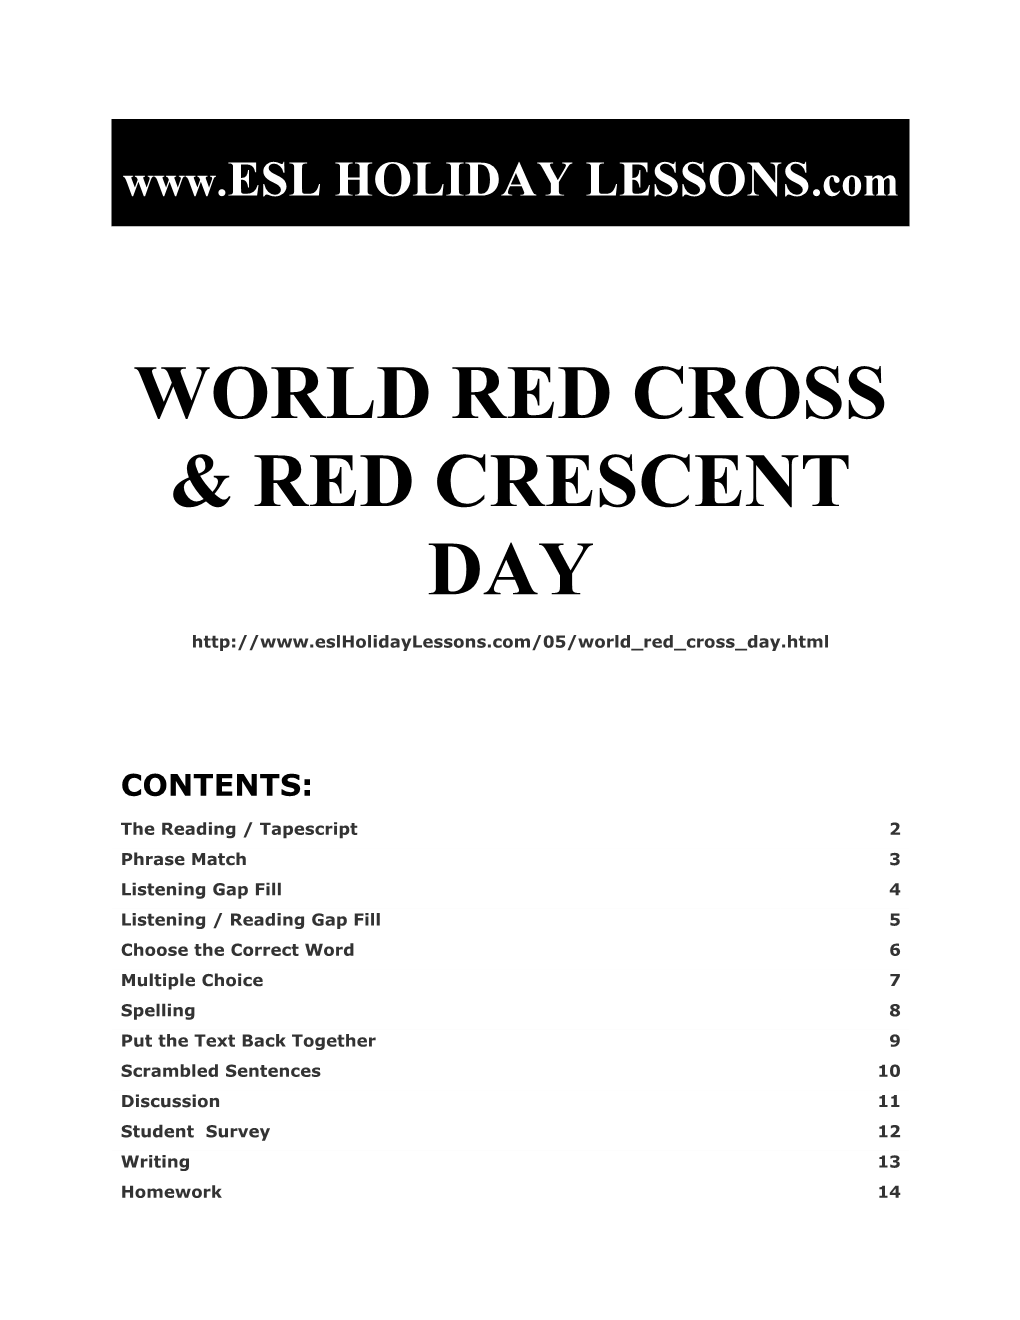 Holiday Lessons - International Red Cross Day